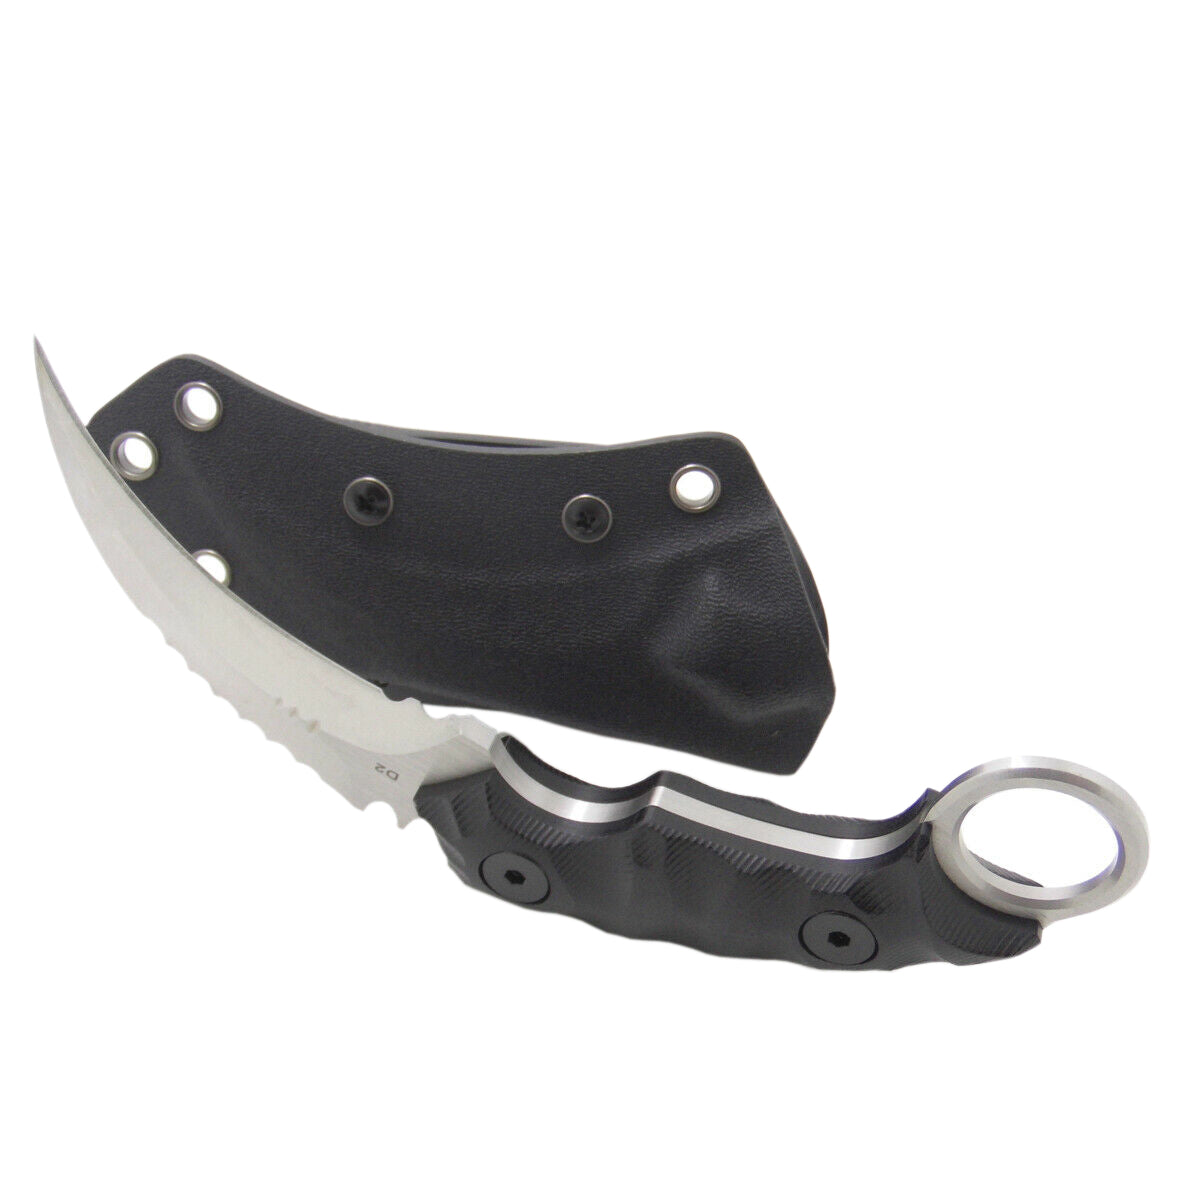 Tactical, Hunting, and Karambit Knife Set Collection (multiple colors) –  knifewarrs